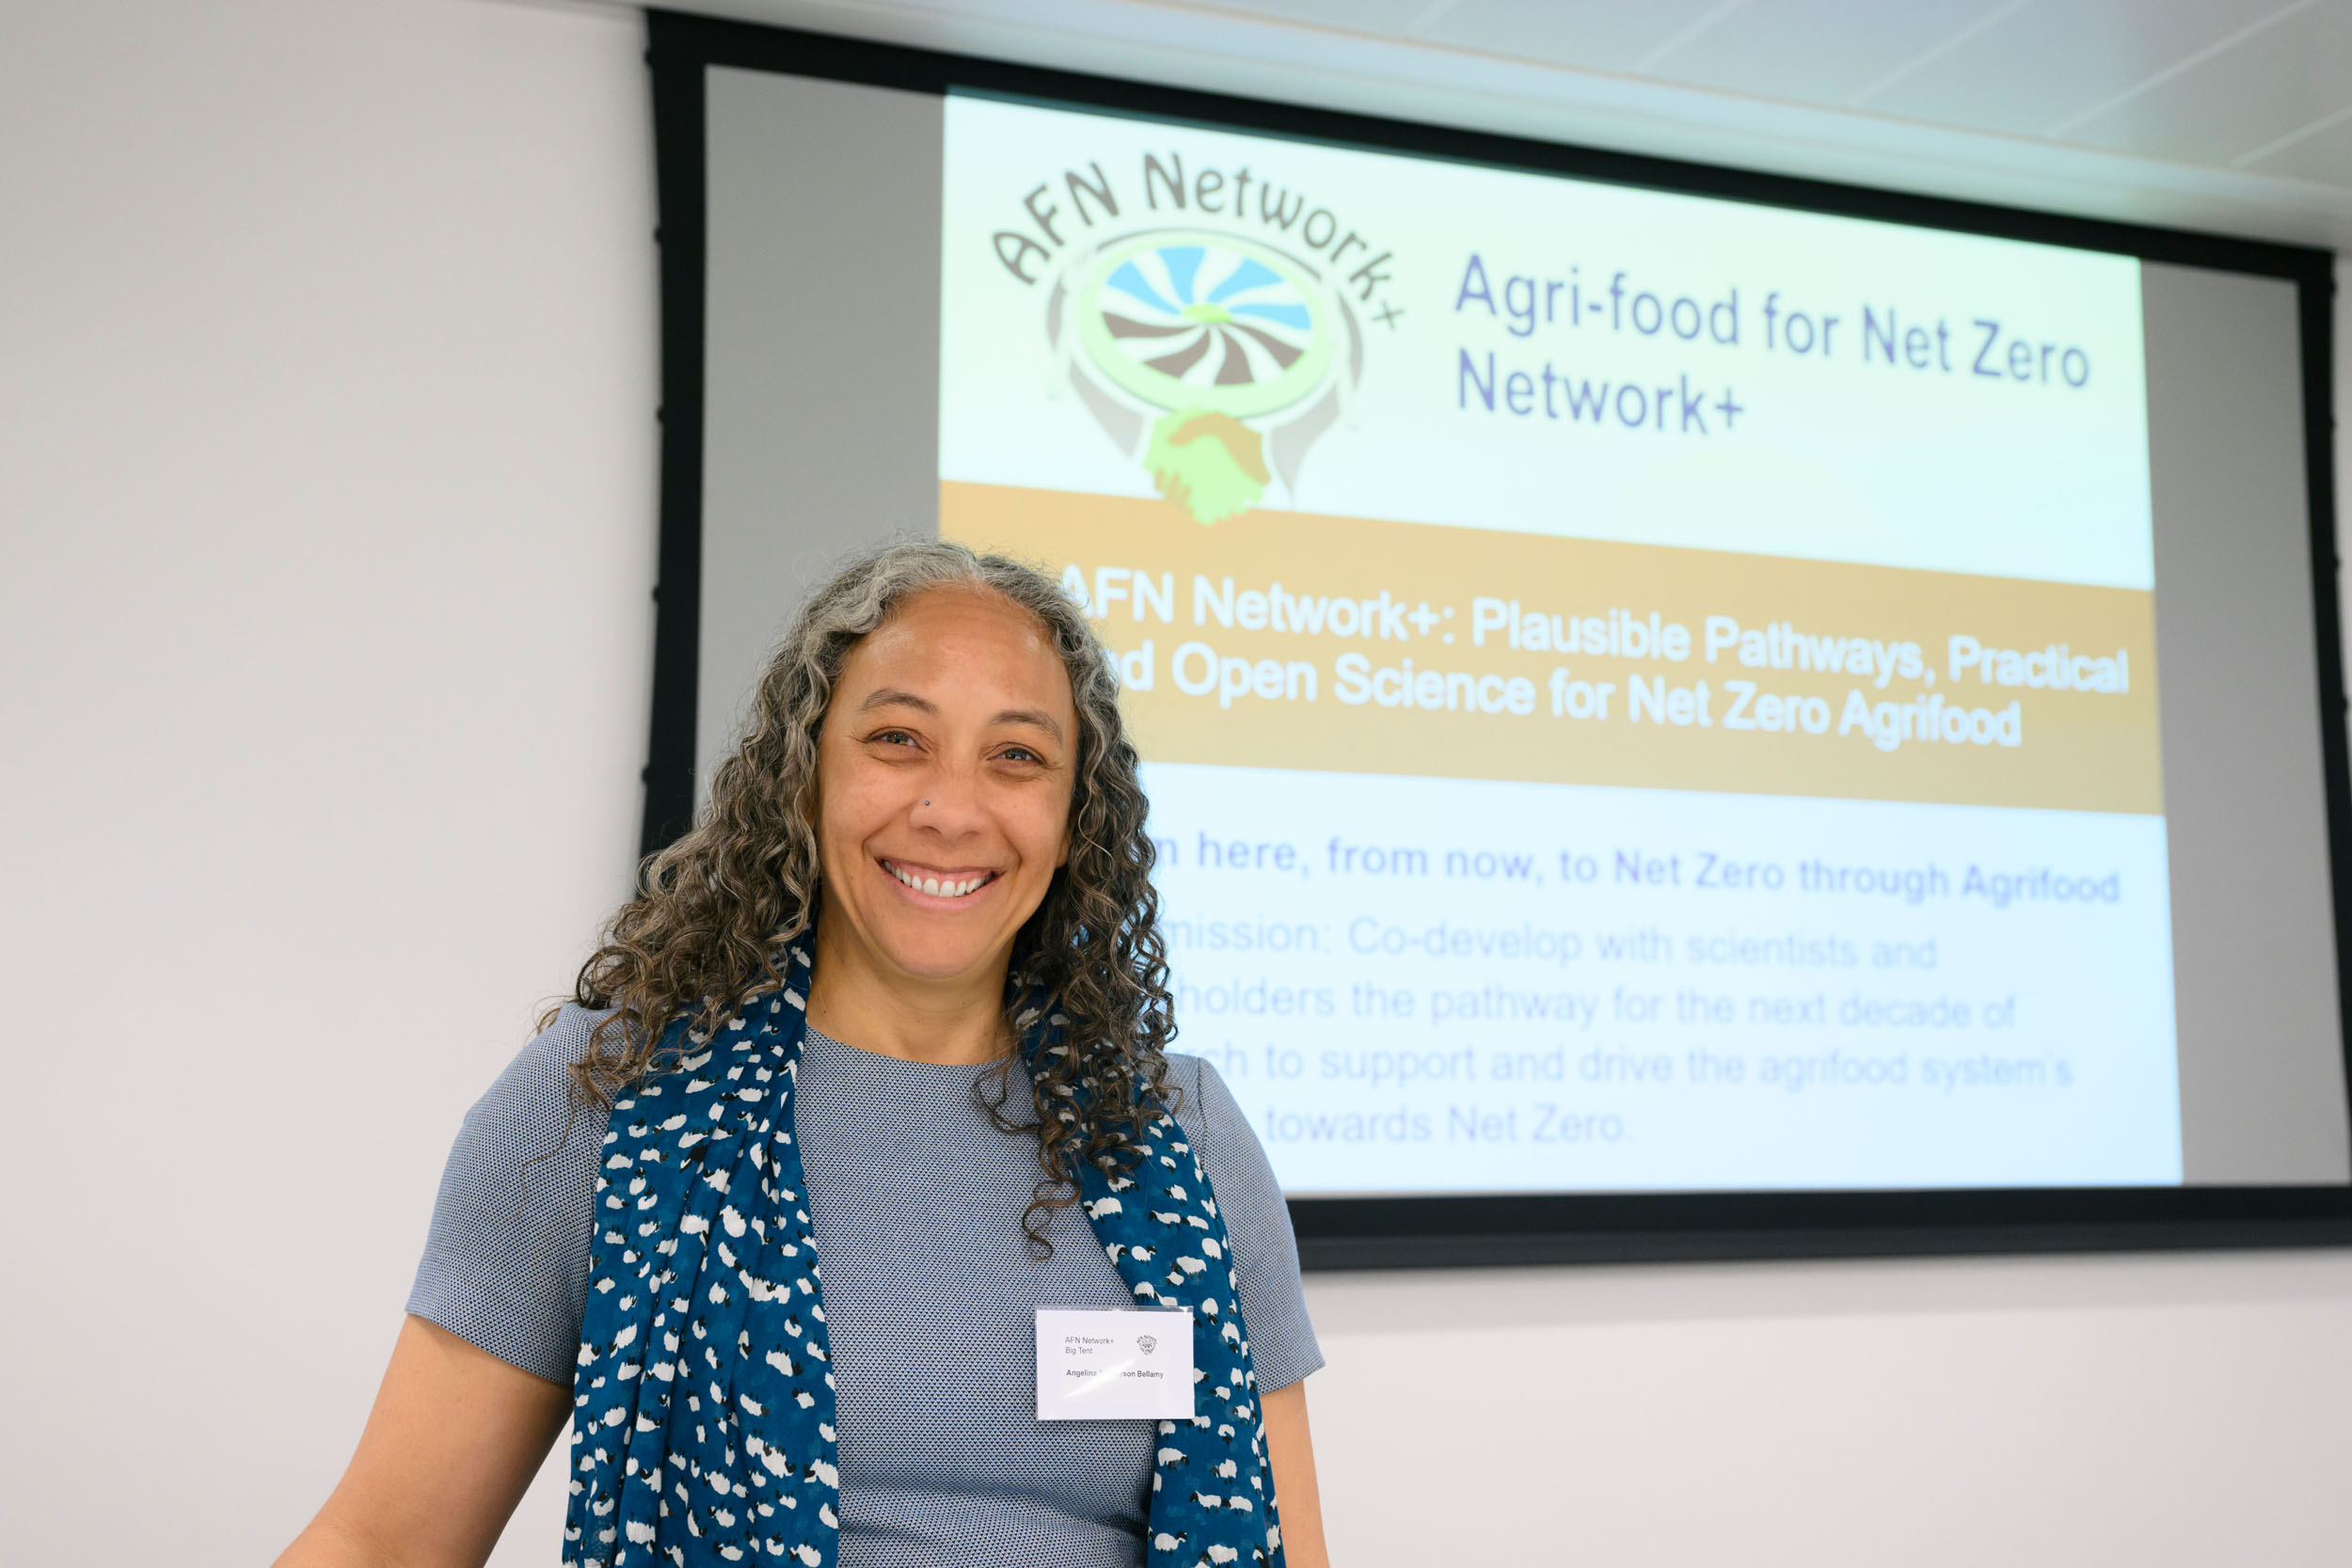 A person stood at the front of the room, smiling, ready to present at the AFN Network+ “Big Tent Event”